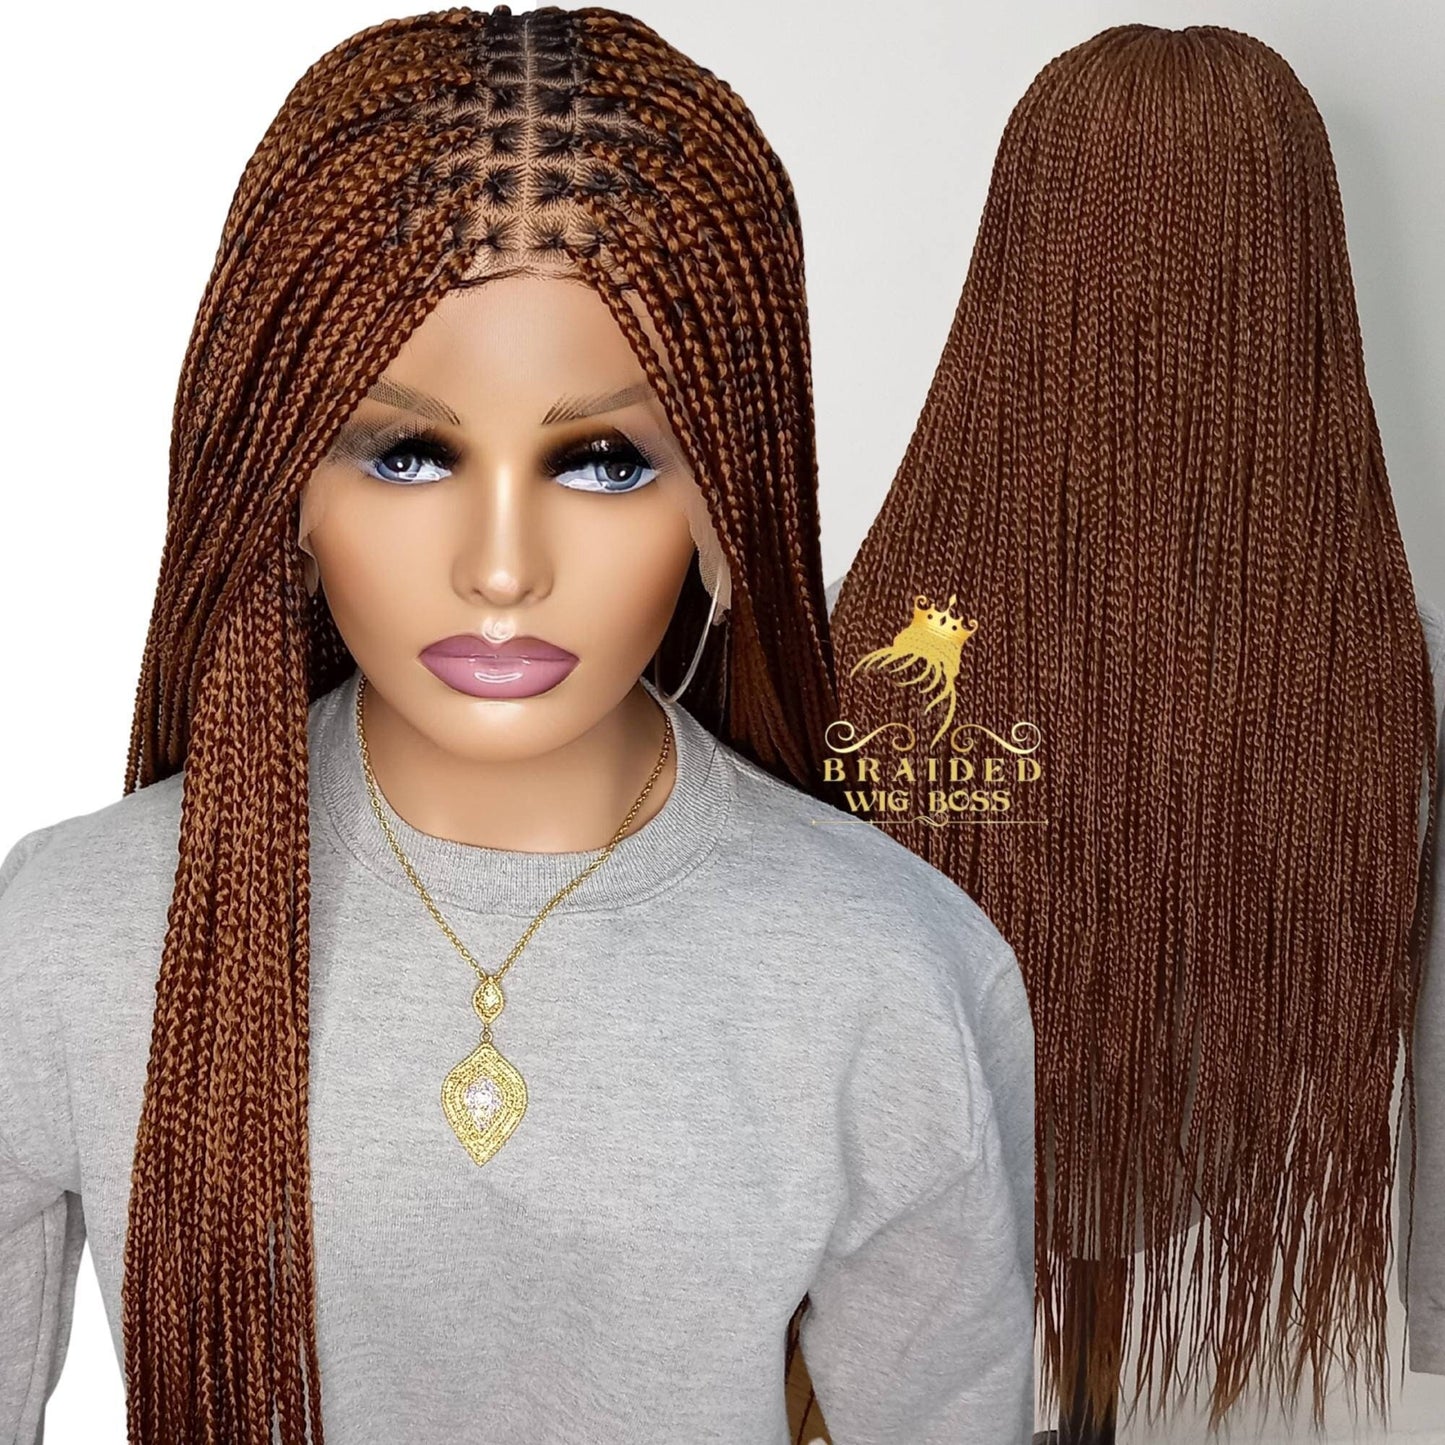 Knotless Auburn Braids Wig with 13X6 Lace Front and Baby Hair for Black Women, 30 inches, braided wigs for black women also in other colors